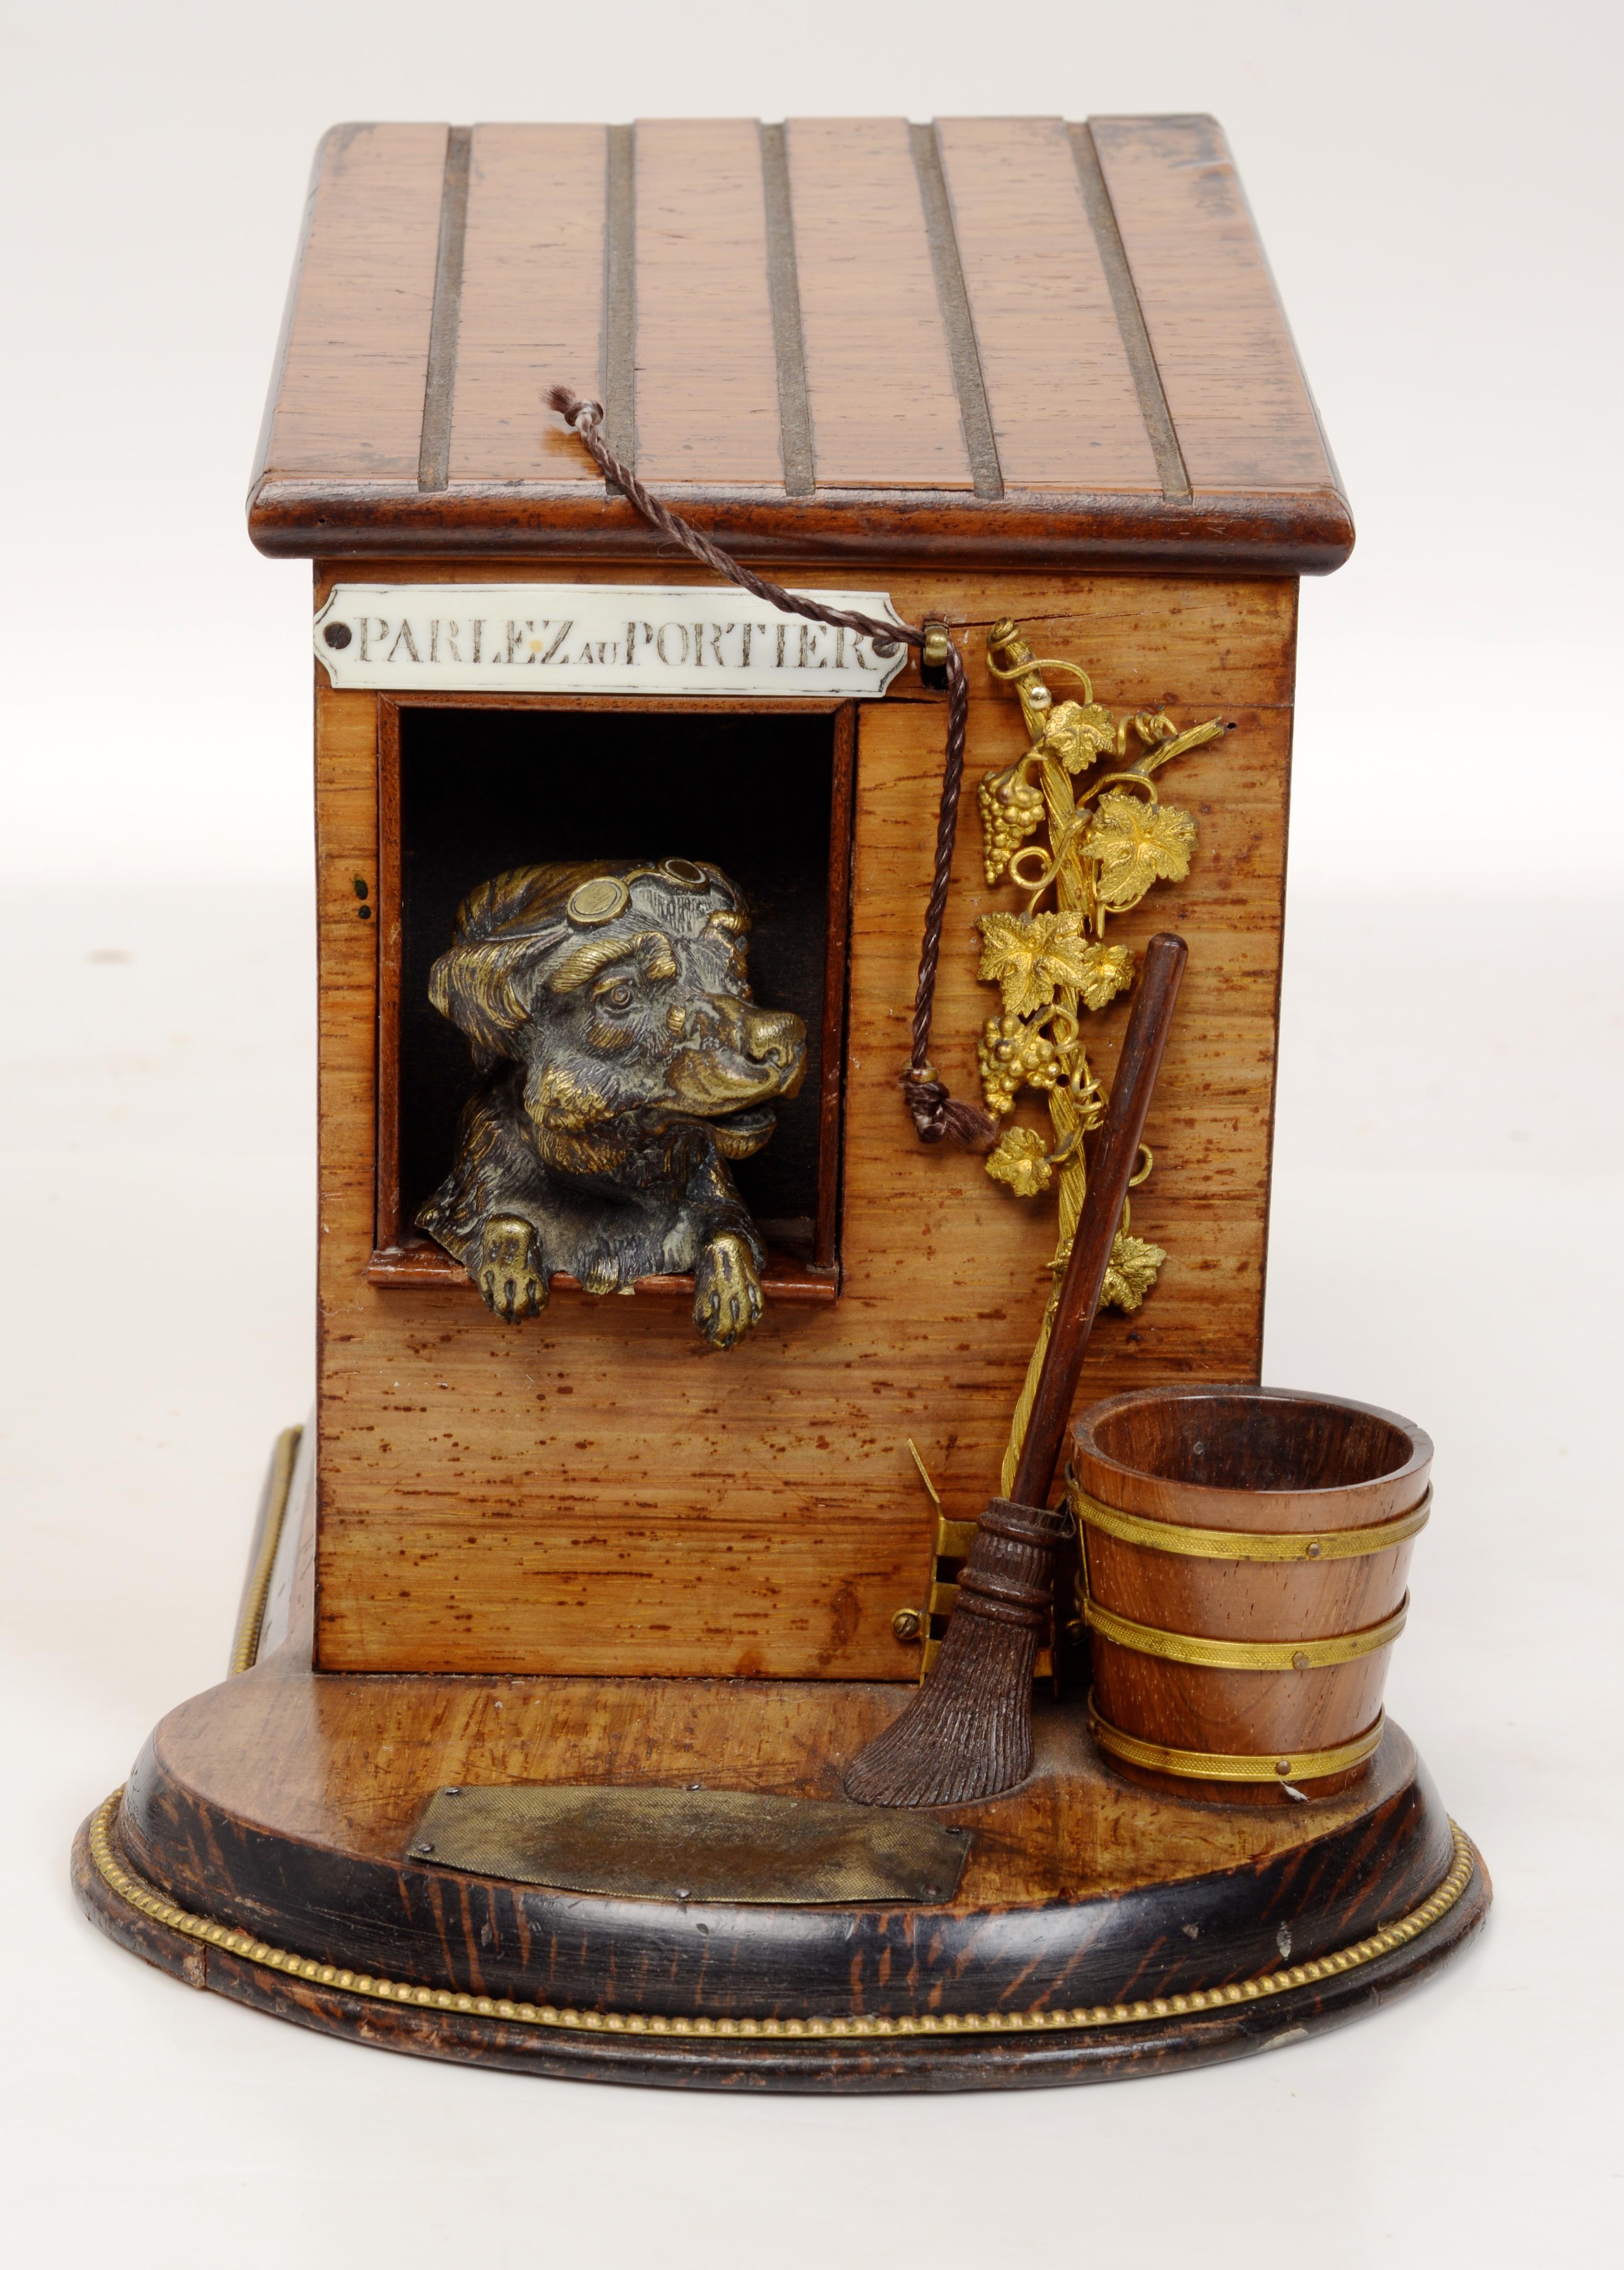 19th Century Cigar Box With a Terrier in A Dog House, French, c1890. Exceptionally rare and highly sought after, this whimsical piece features an adorable cast brass terrier with a hat and glasses guarding his master's cigars. The walnut case with